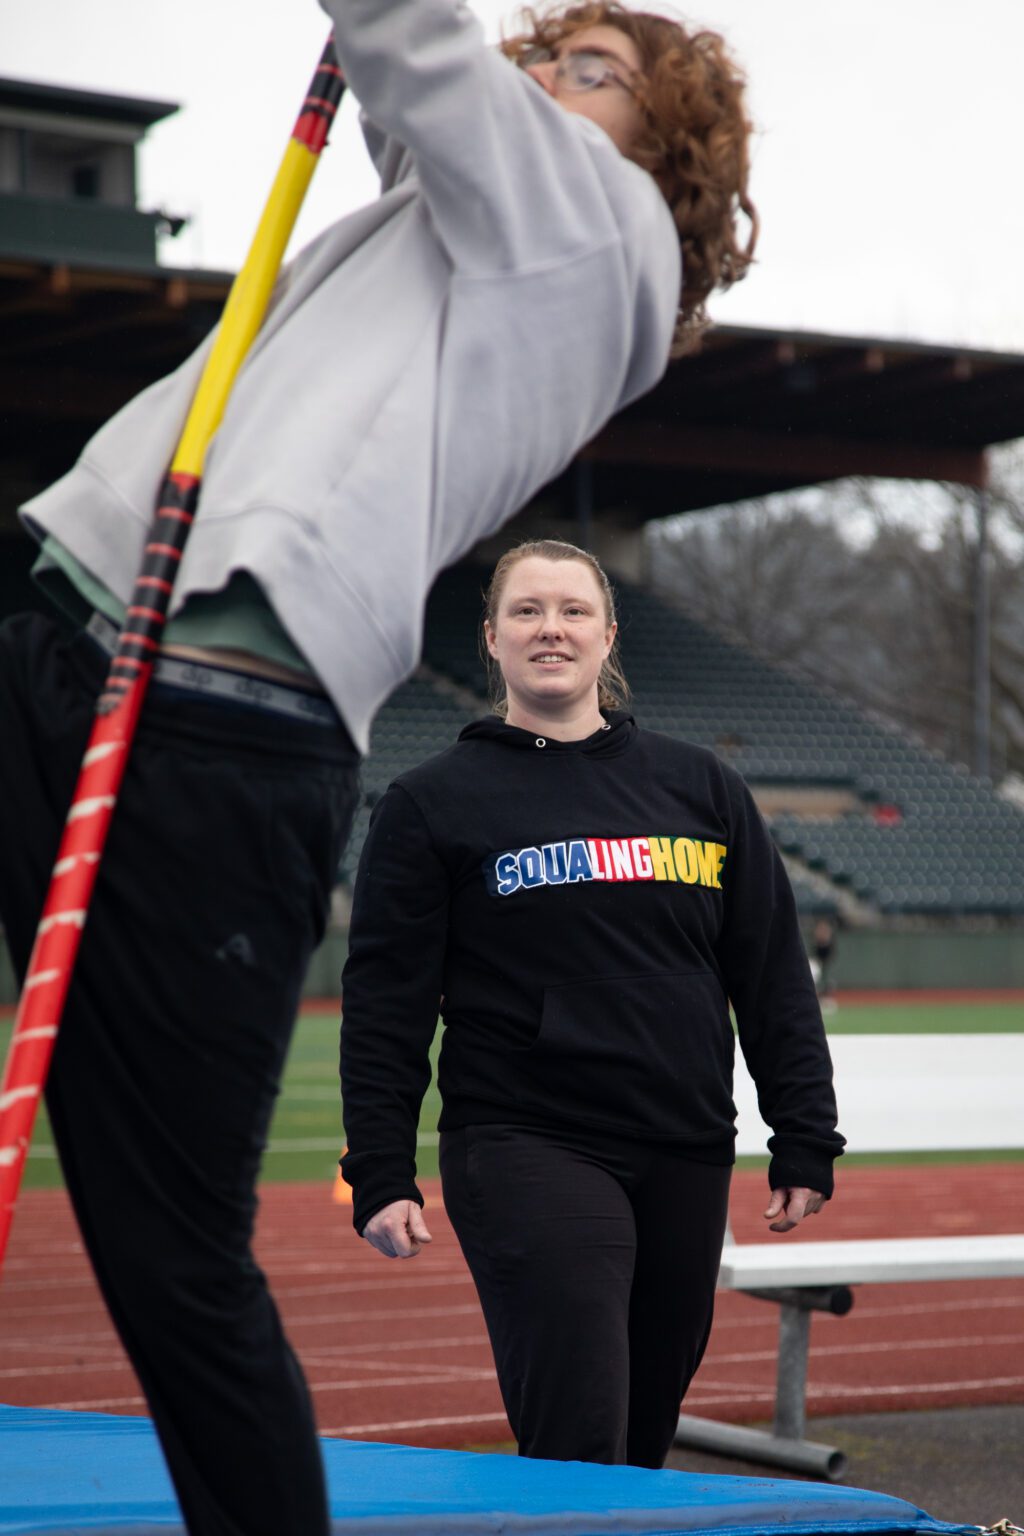 Dressed in her "SquaLingHome" sweatshirt, Coach Morgan Annable watches one of her students attempt to vault with a multi-colored pole.